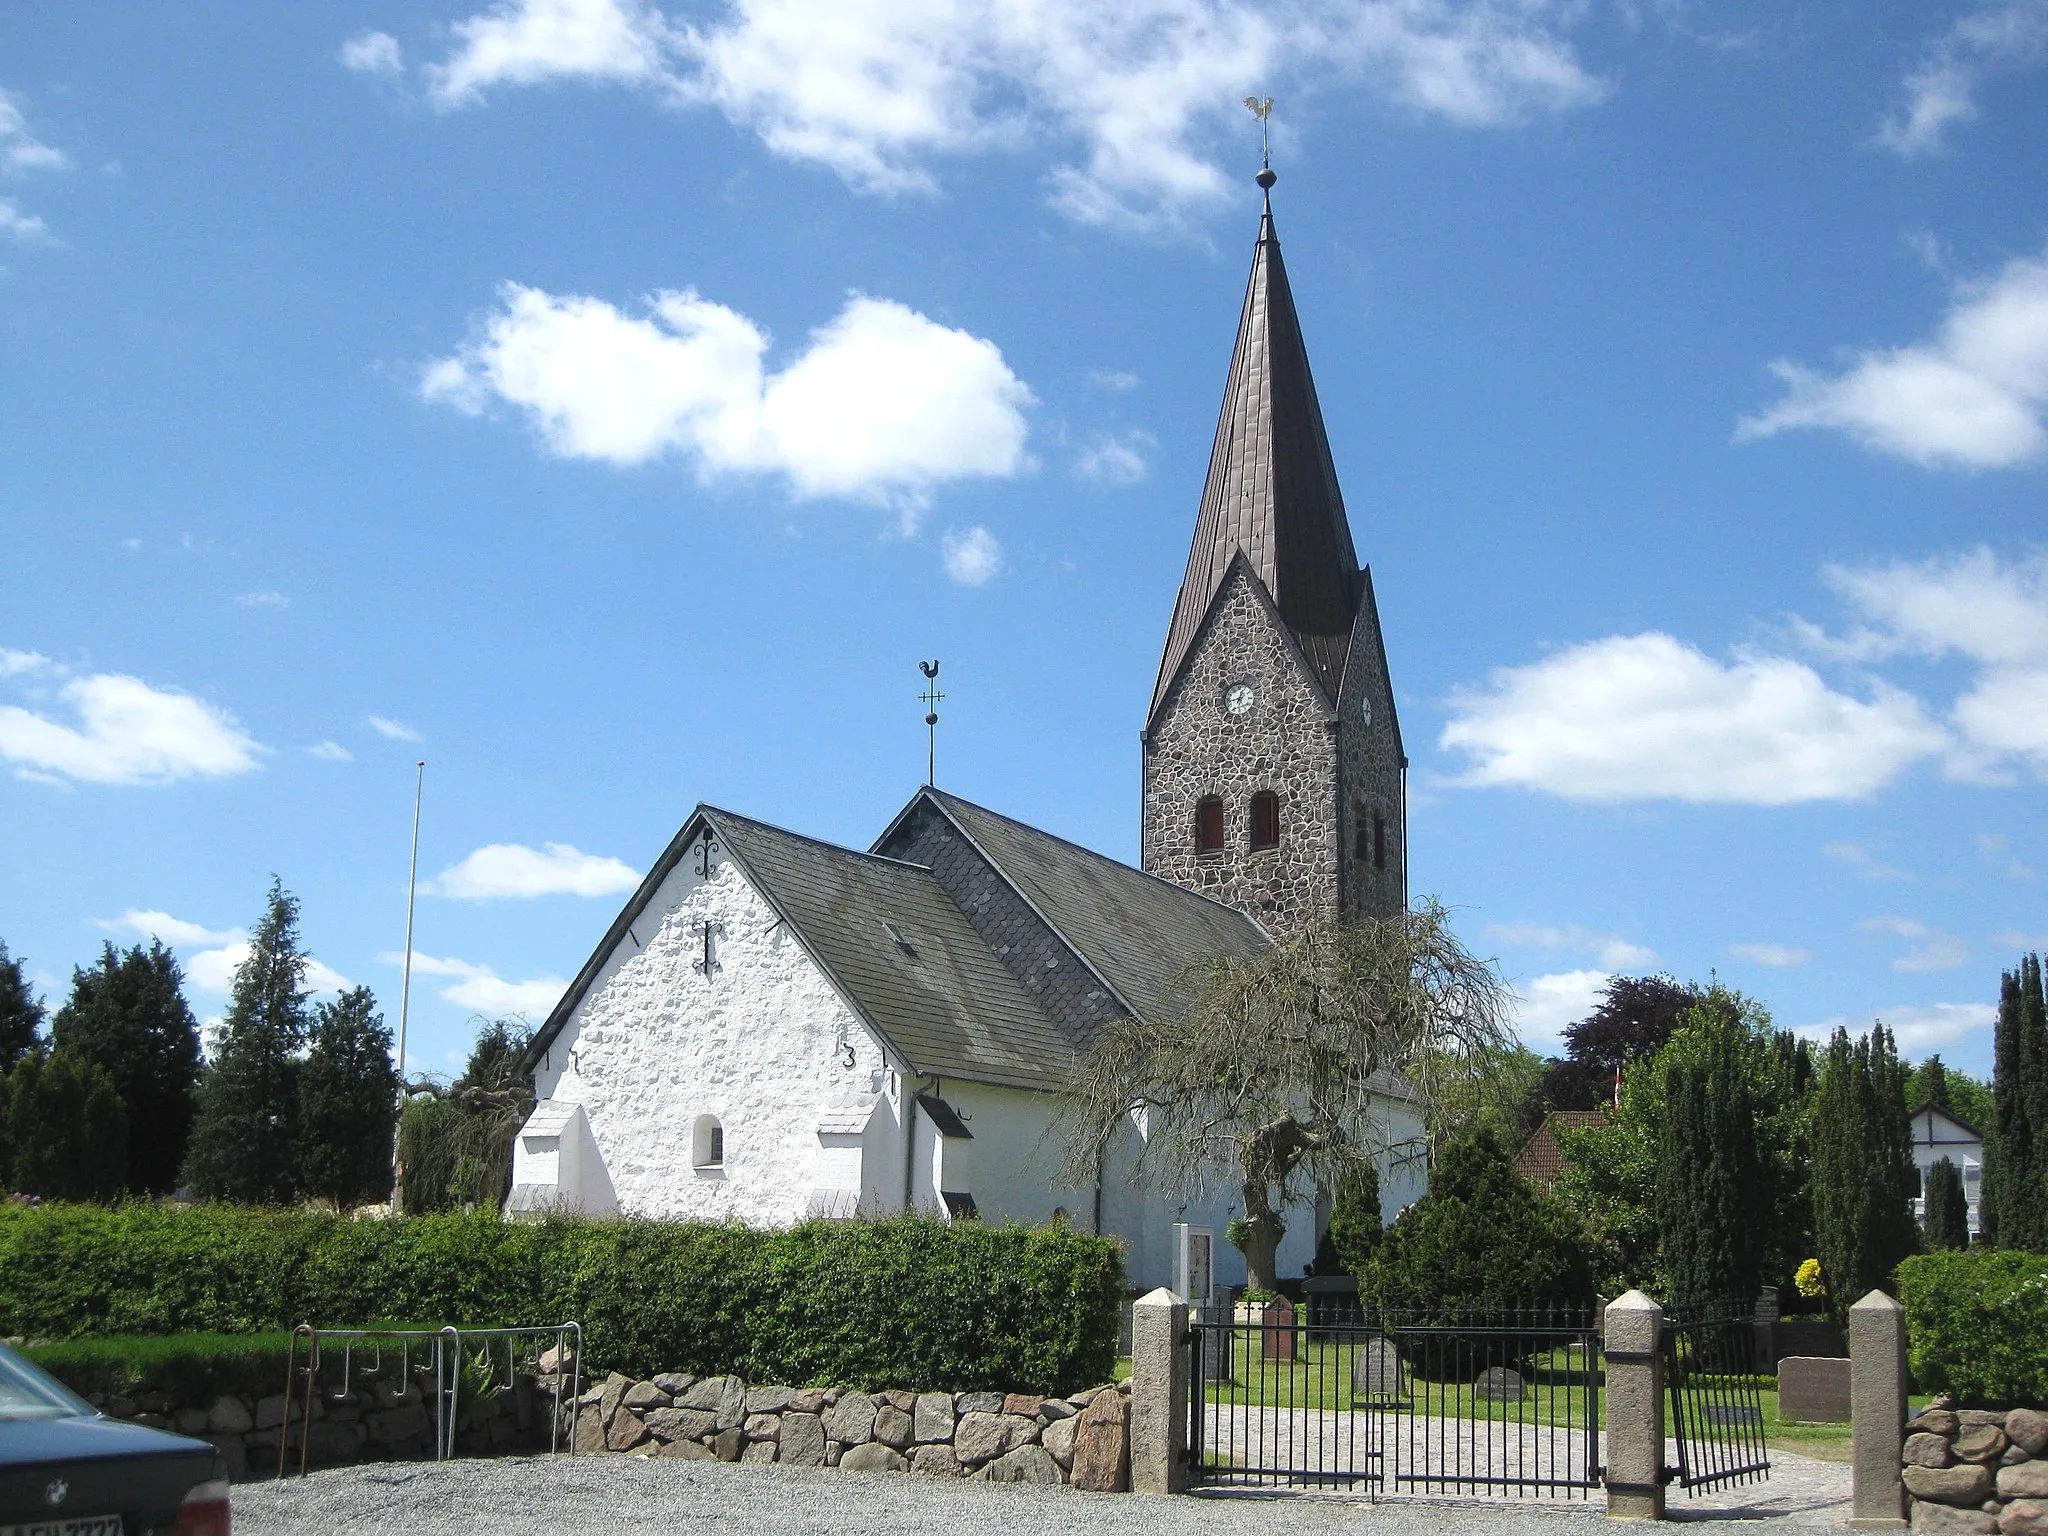 Photo showing: The church "Bov Kirke" in the northern part of the small town "Padborg". The town is located in Southern Jutland, Denmark, close to the German border.